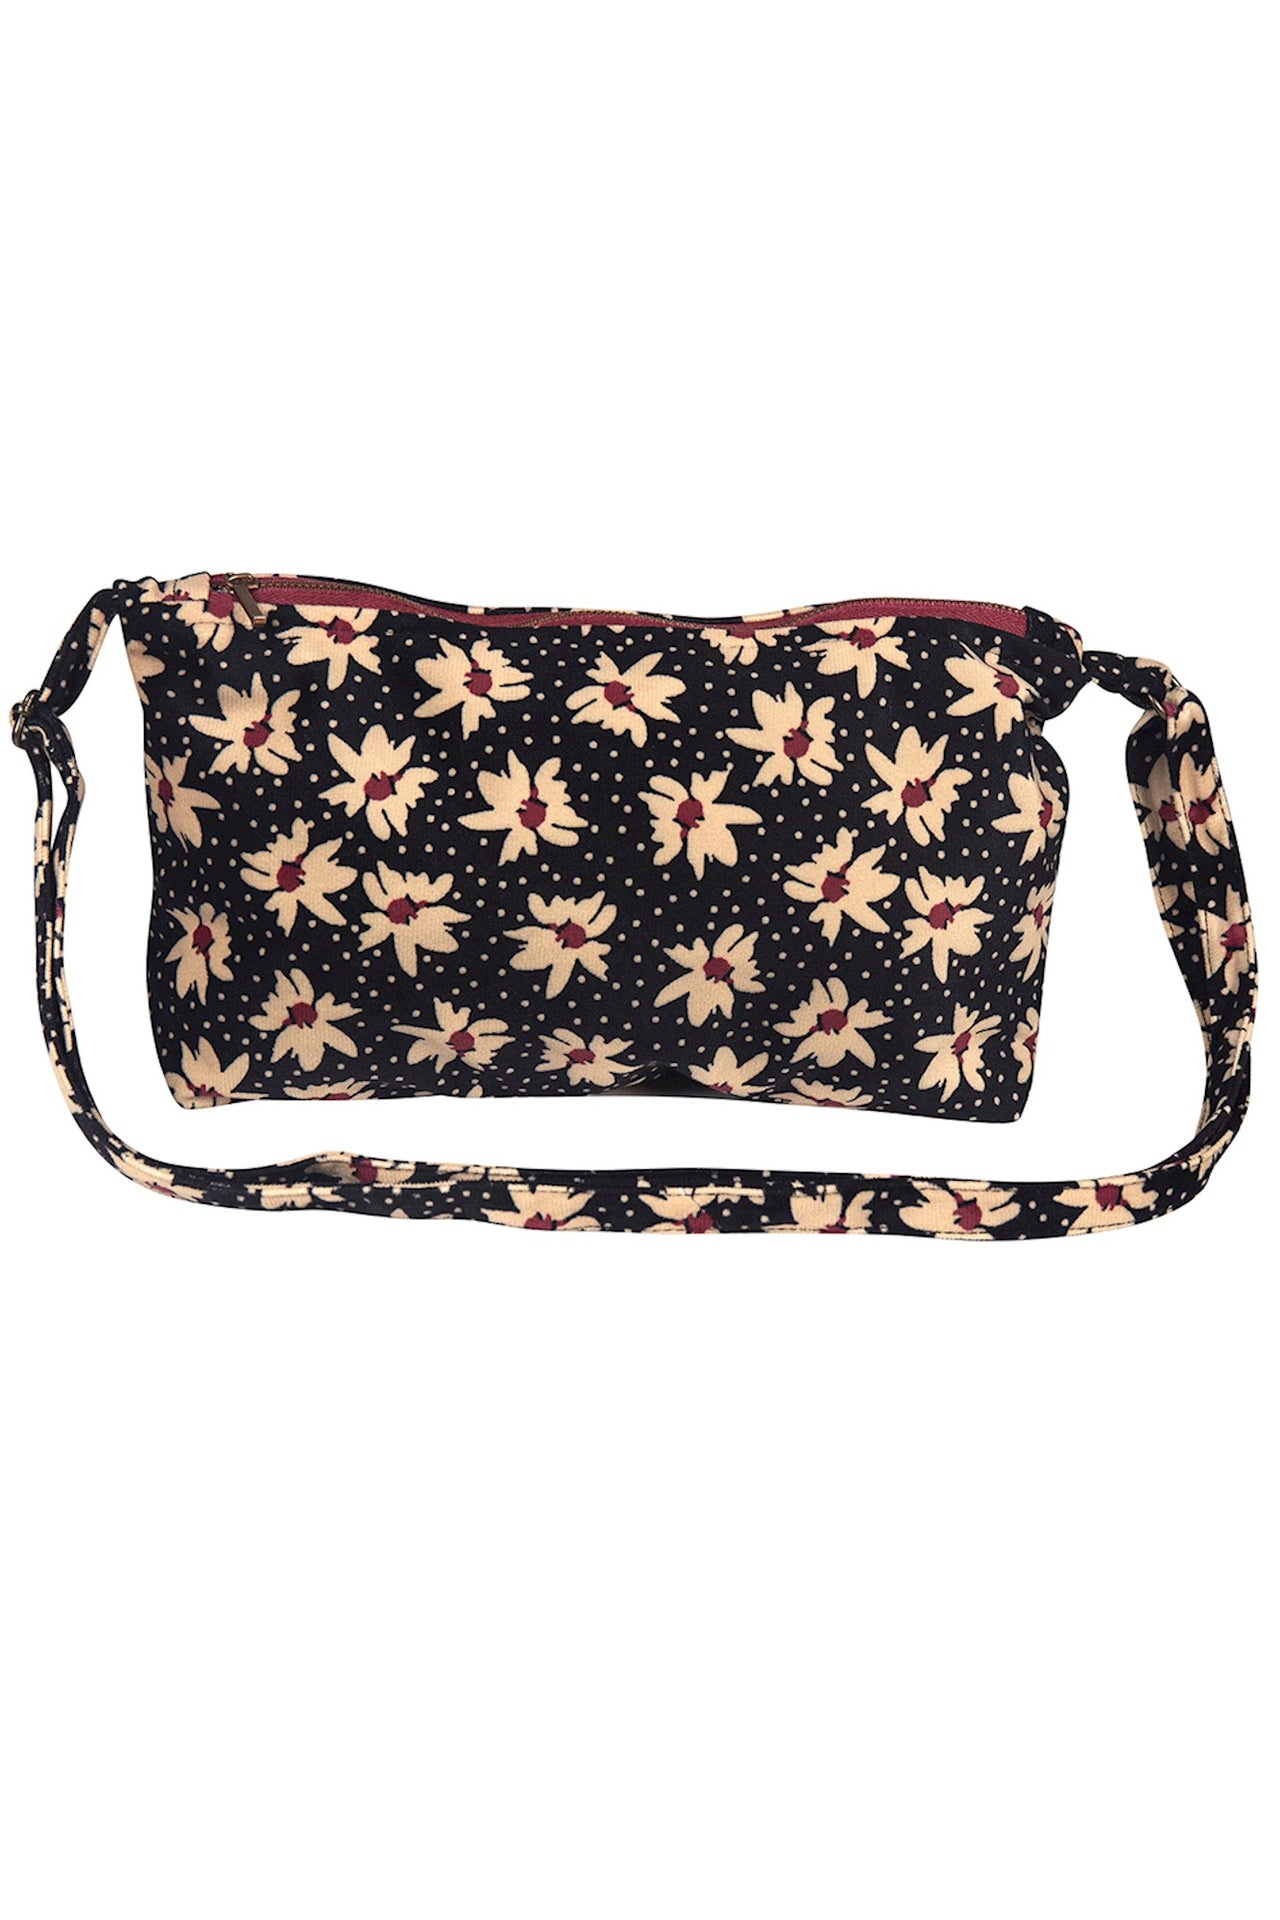 Zilch Small Bag - Edelweiss Black